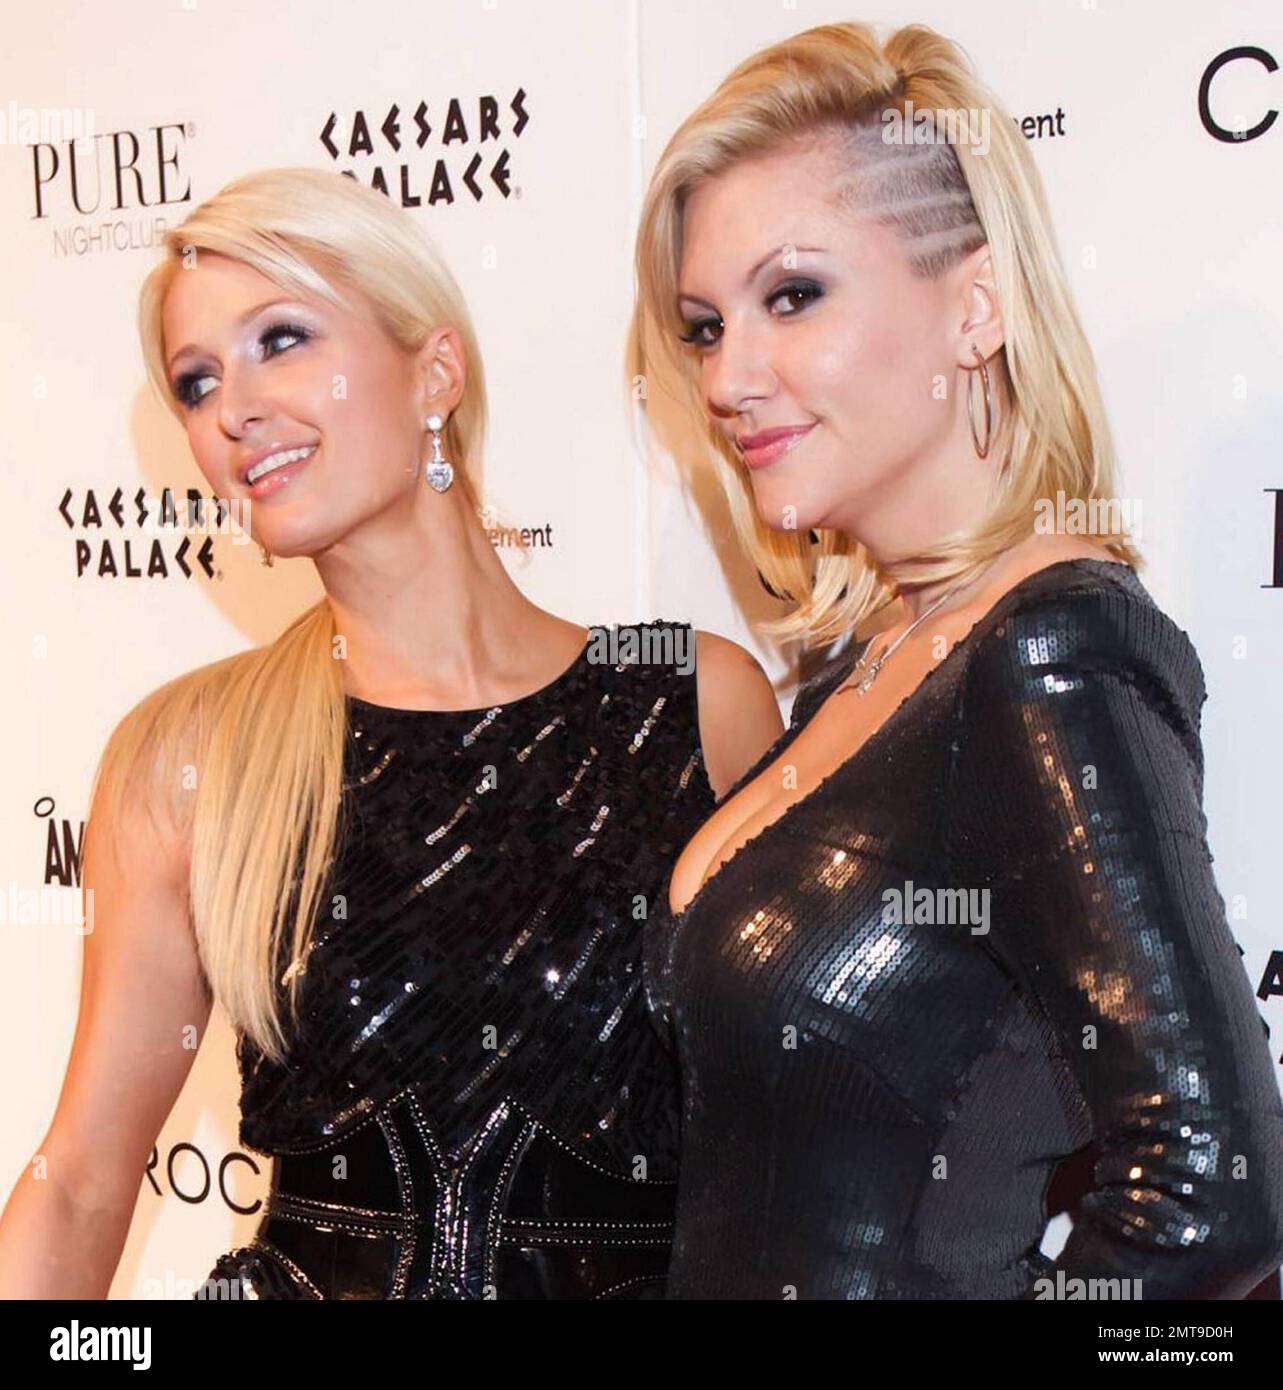 In a black sequin mini dress accessorized with a corset belt heiress Paris Hilton poses on the red carpet at Caesars Palace's Pure nightclub in celebration of Playboy playmate Jennifer Rovero's 31st birthday.  On the carpet Paris, who appeared to have blemished legs and wore gold nail polish, posed with Jennifer who showed off her detailed undercut hairdo. Las Vegas, NV. 12/14/10. Stock Photo